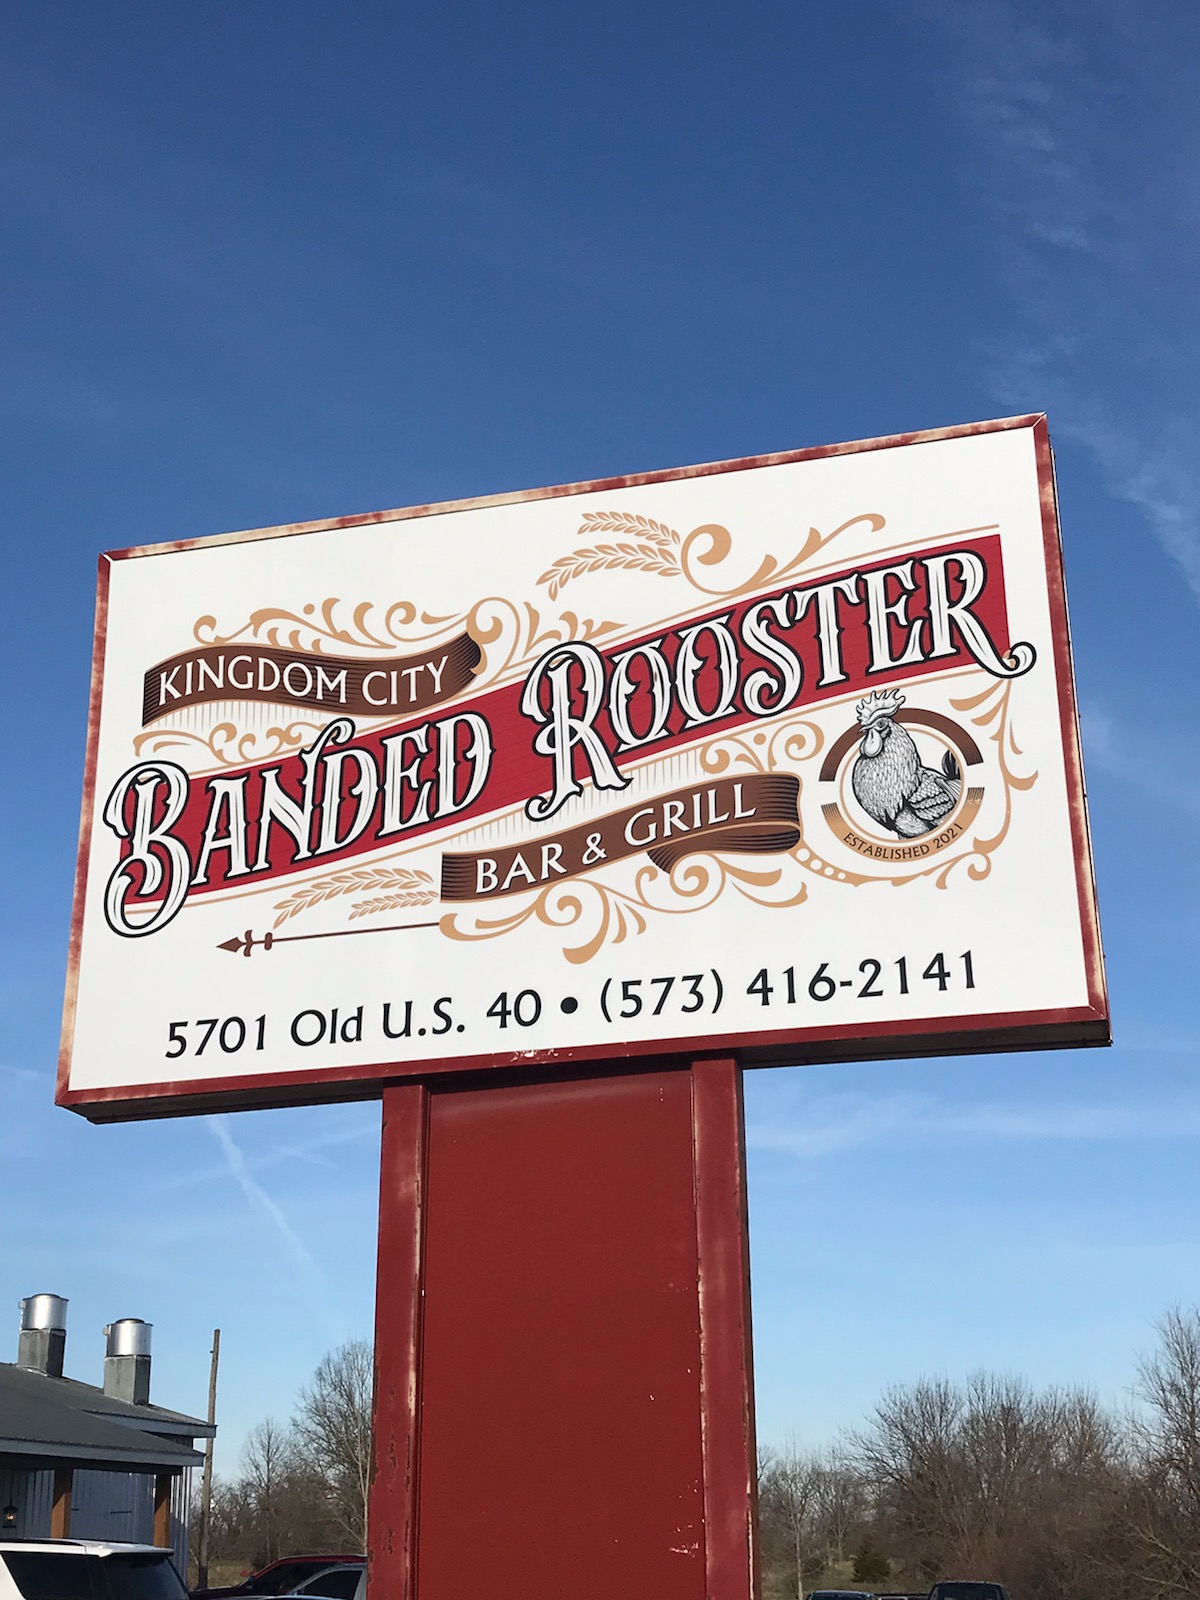 The Banded Rooster Bar & Grill in Kingdom City